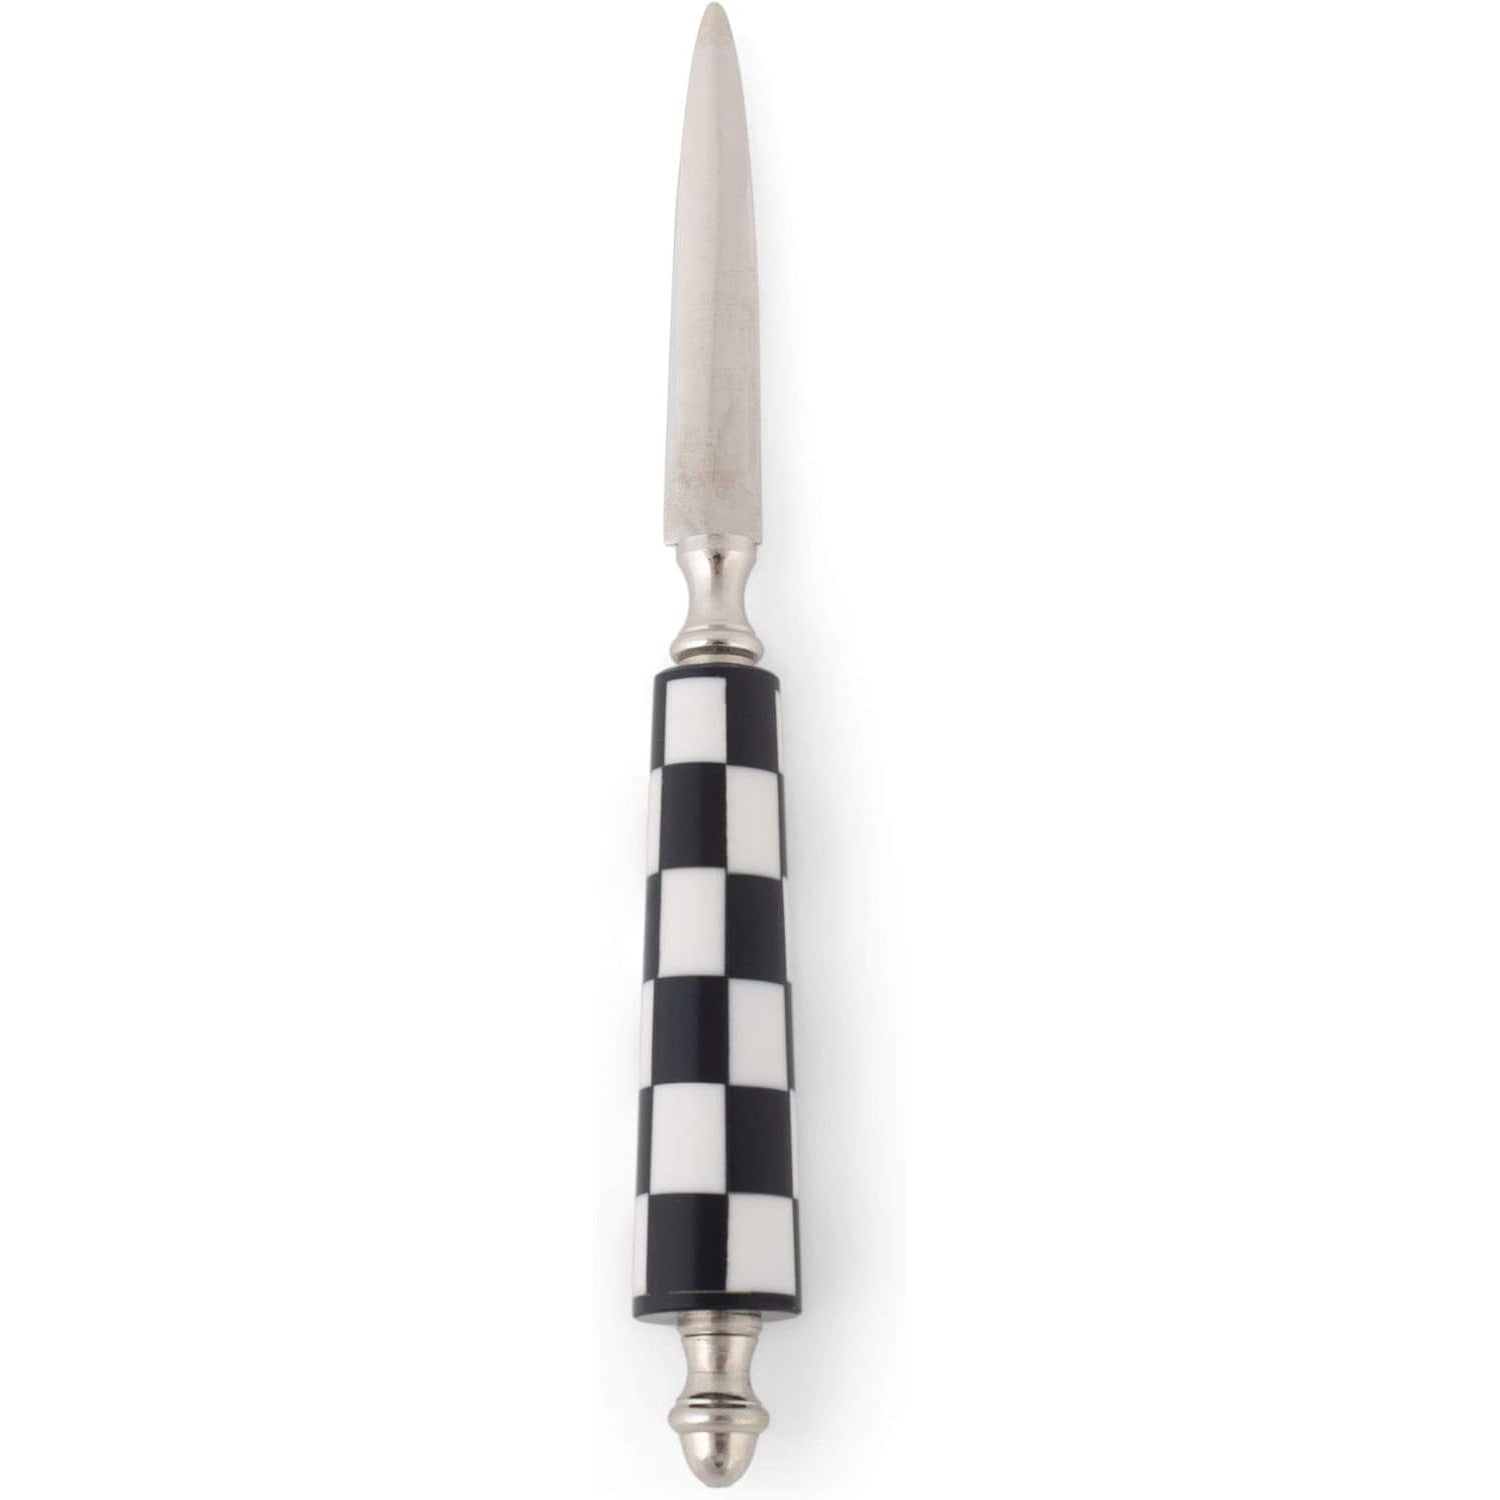 Checkered Envelope Cutter in Black and White | Aesthetic Vintage Desk Decor